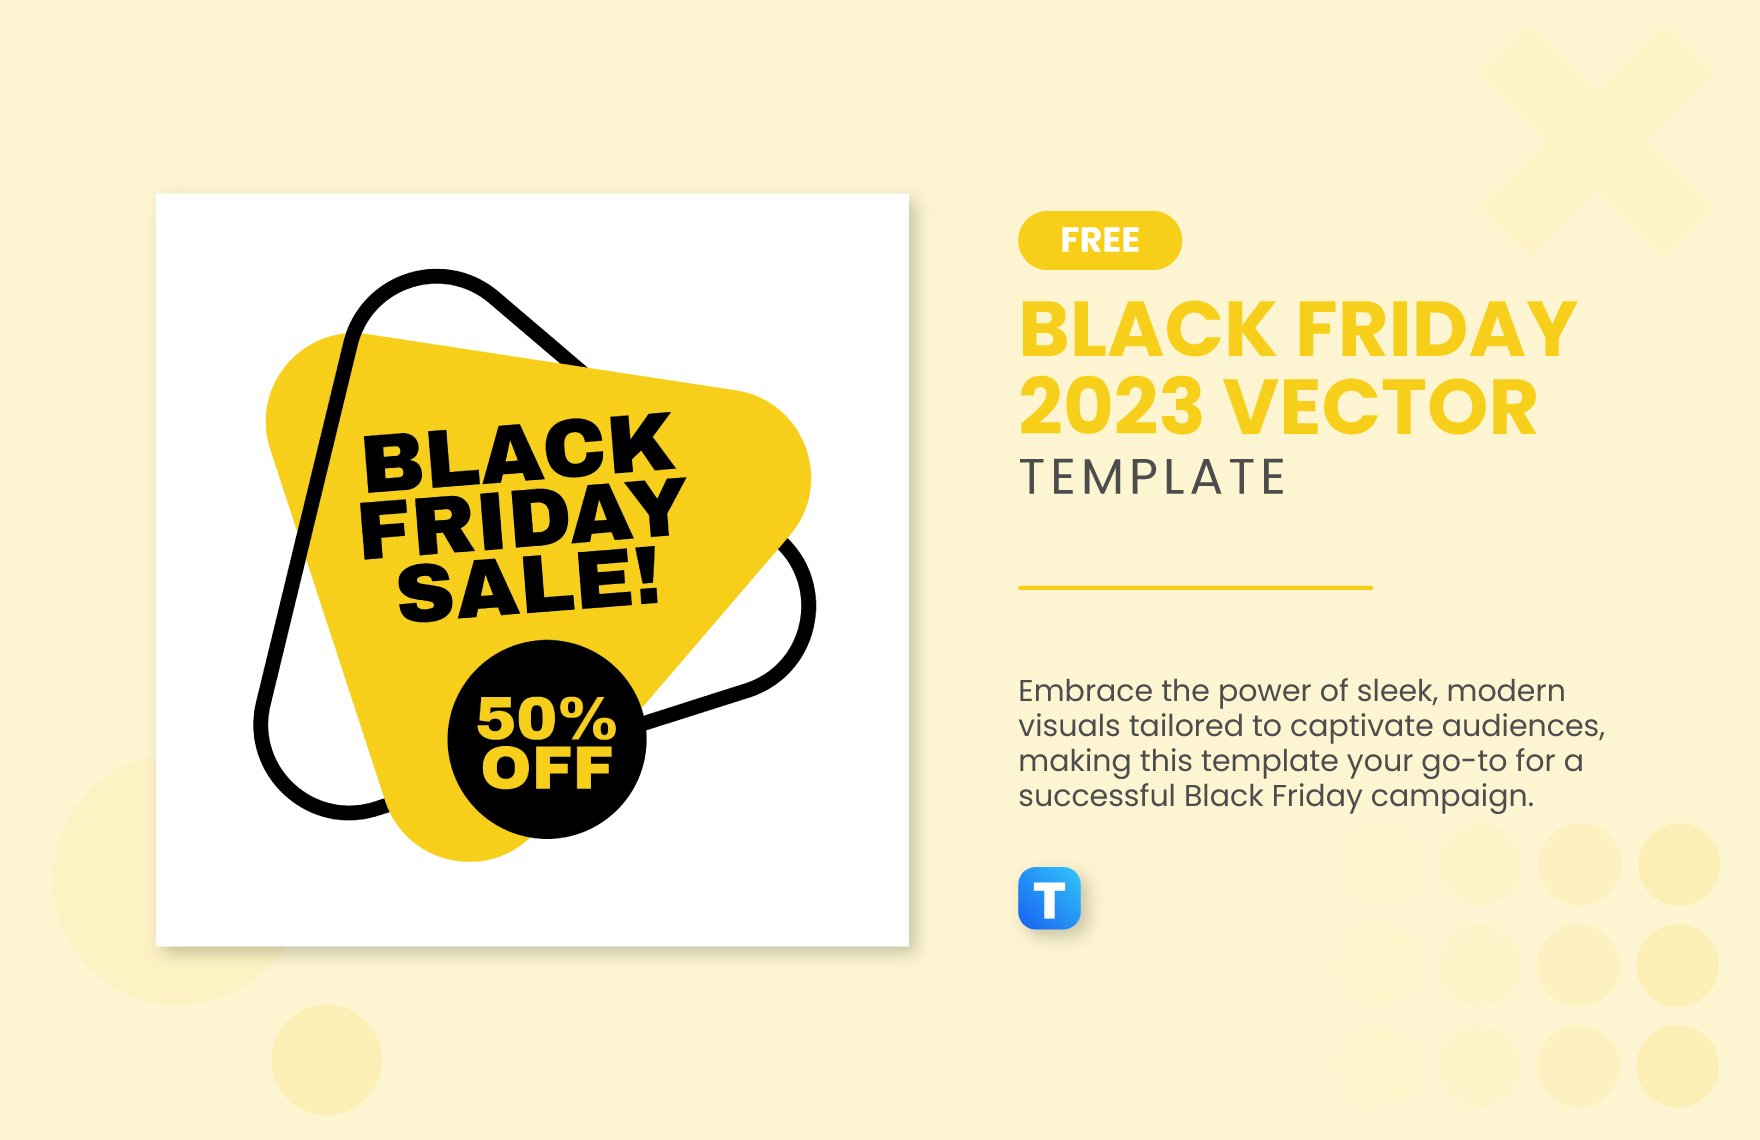 Black Friday 2023 Vector Template